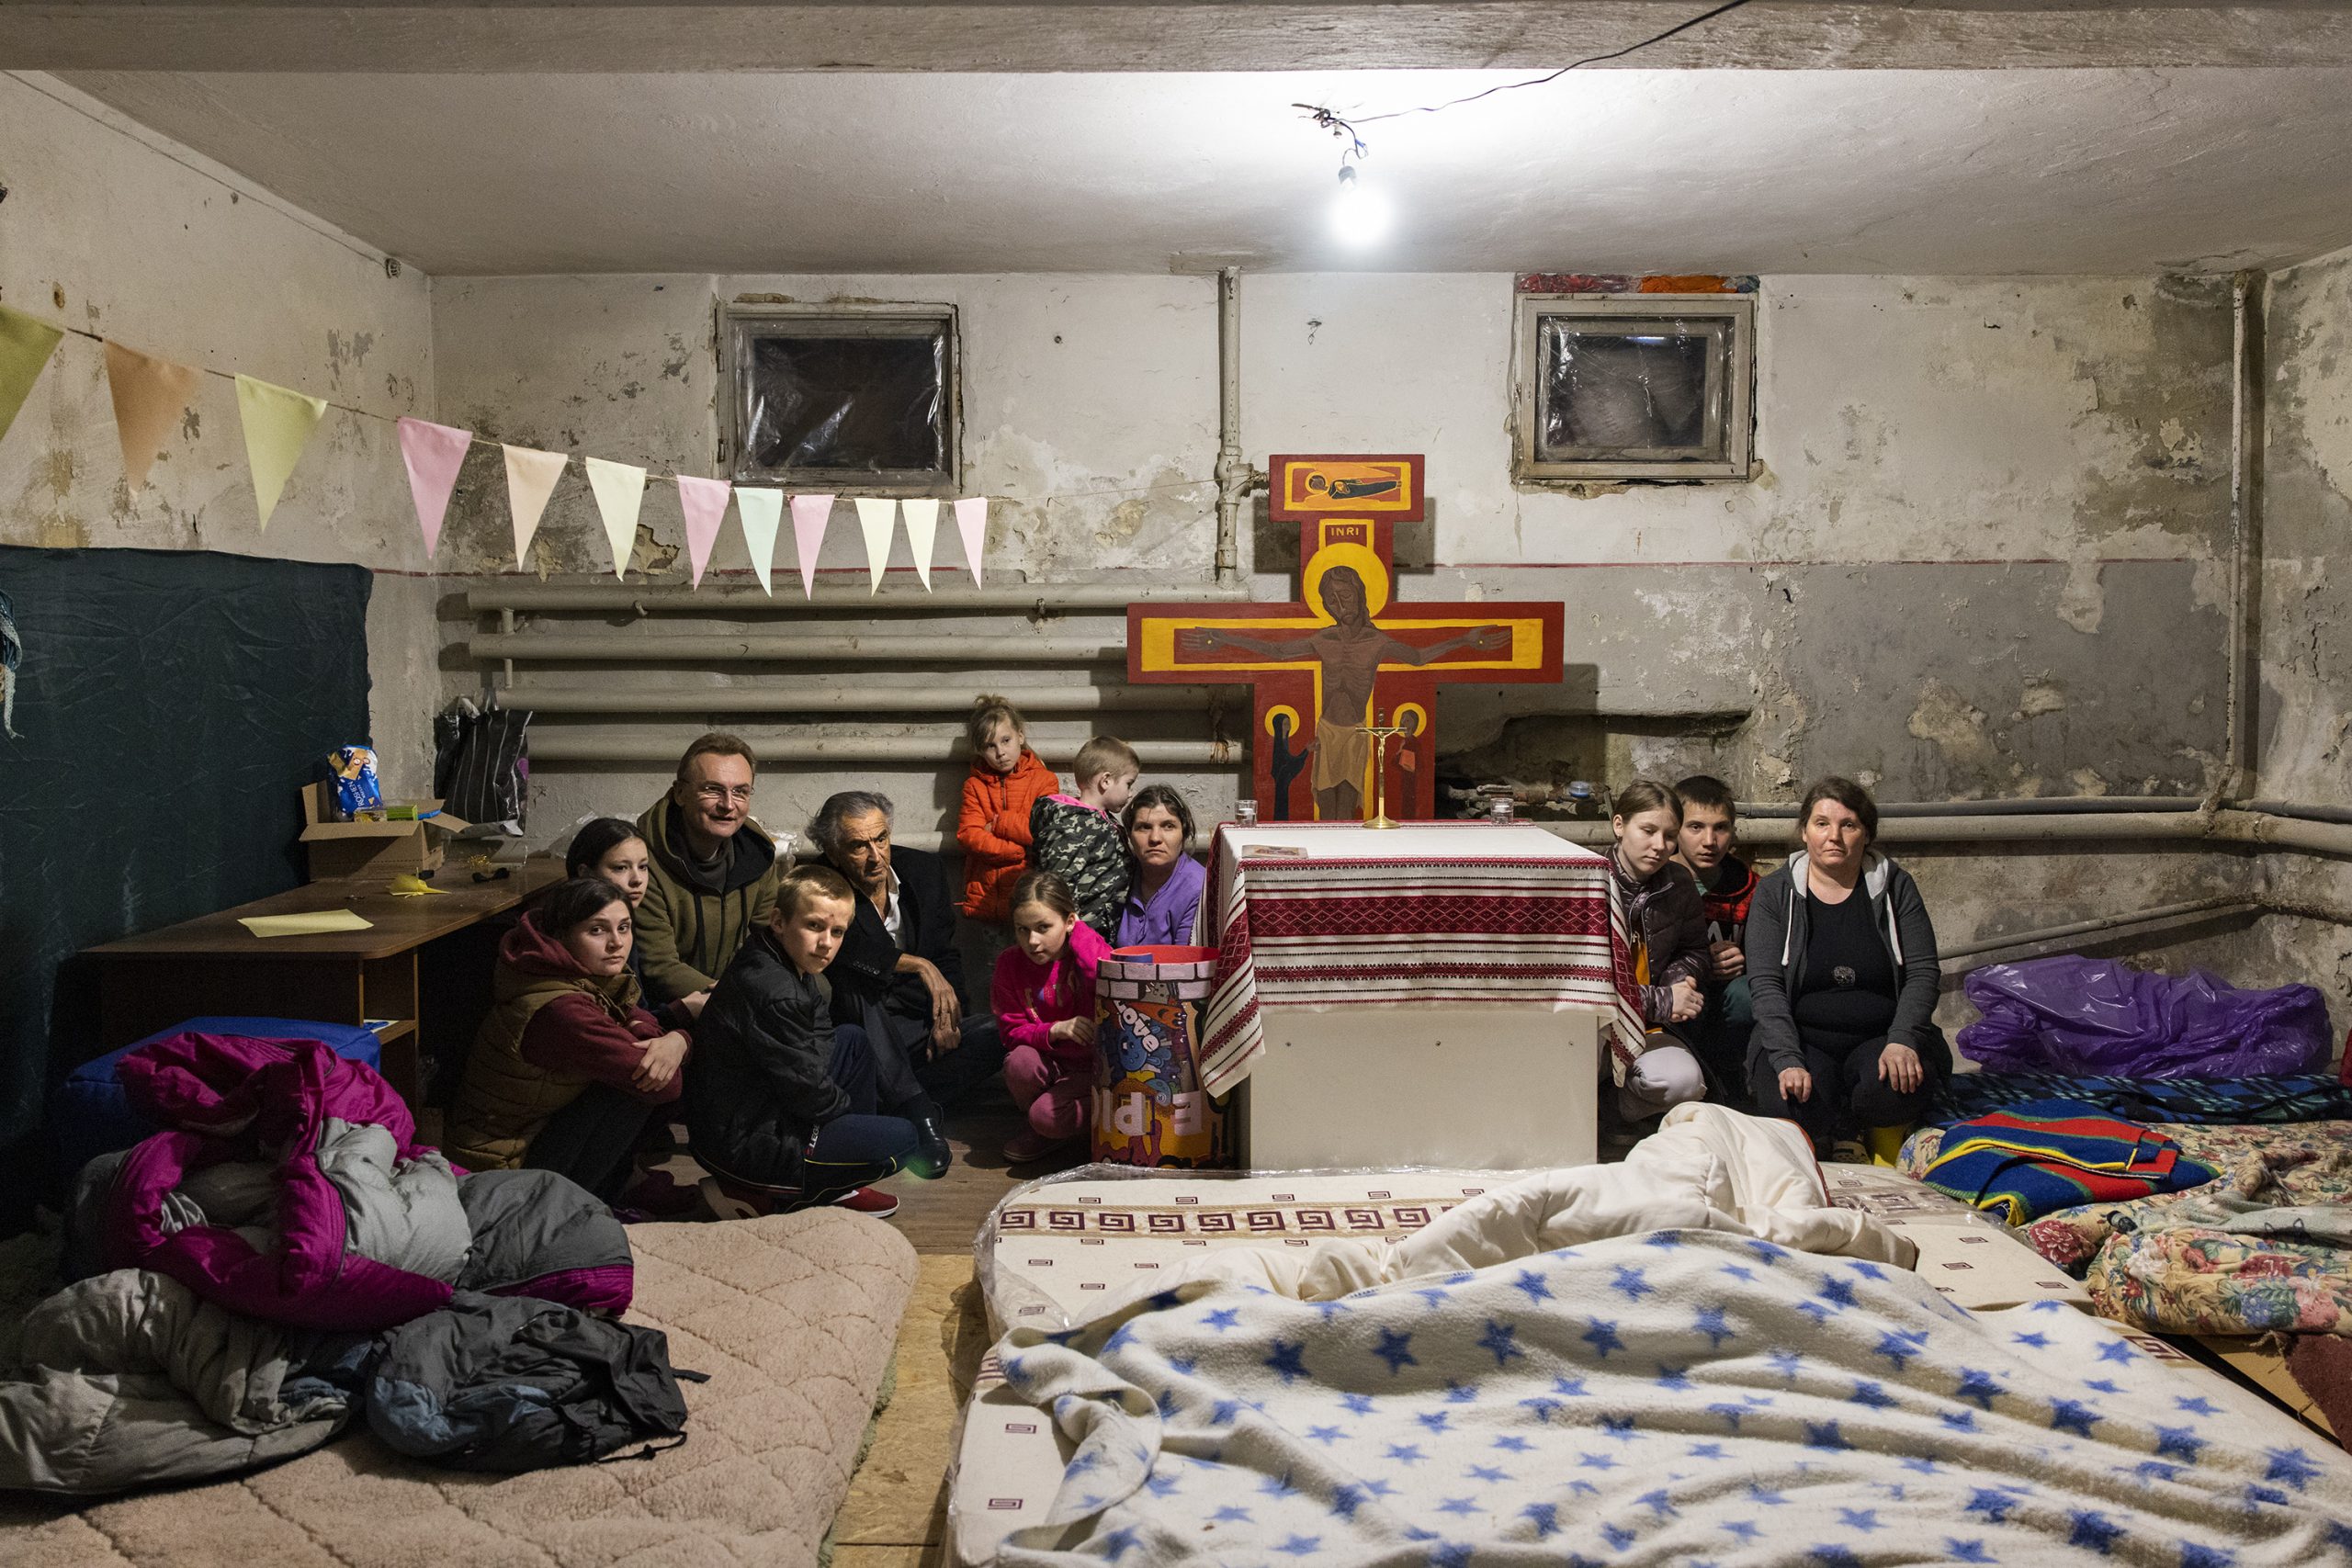 A shelter in the basement of an Orthodox monastery, 20 kilometers away from Kyiv.